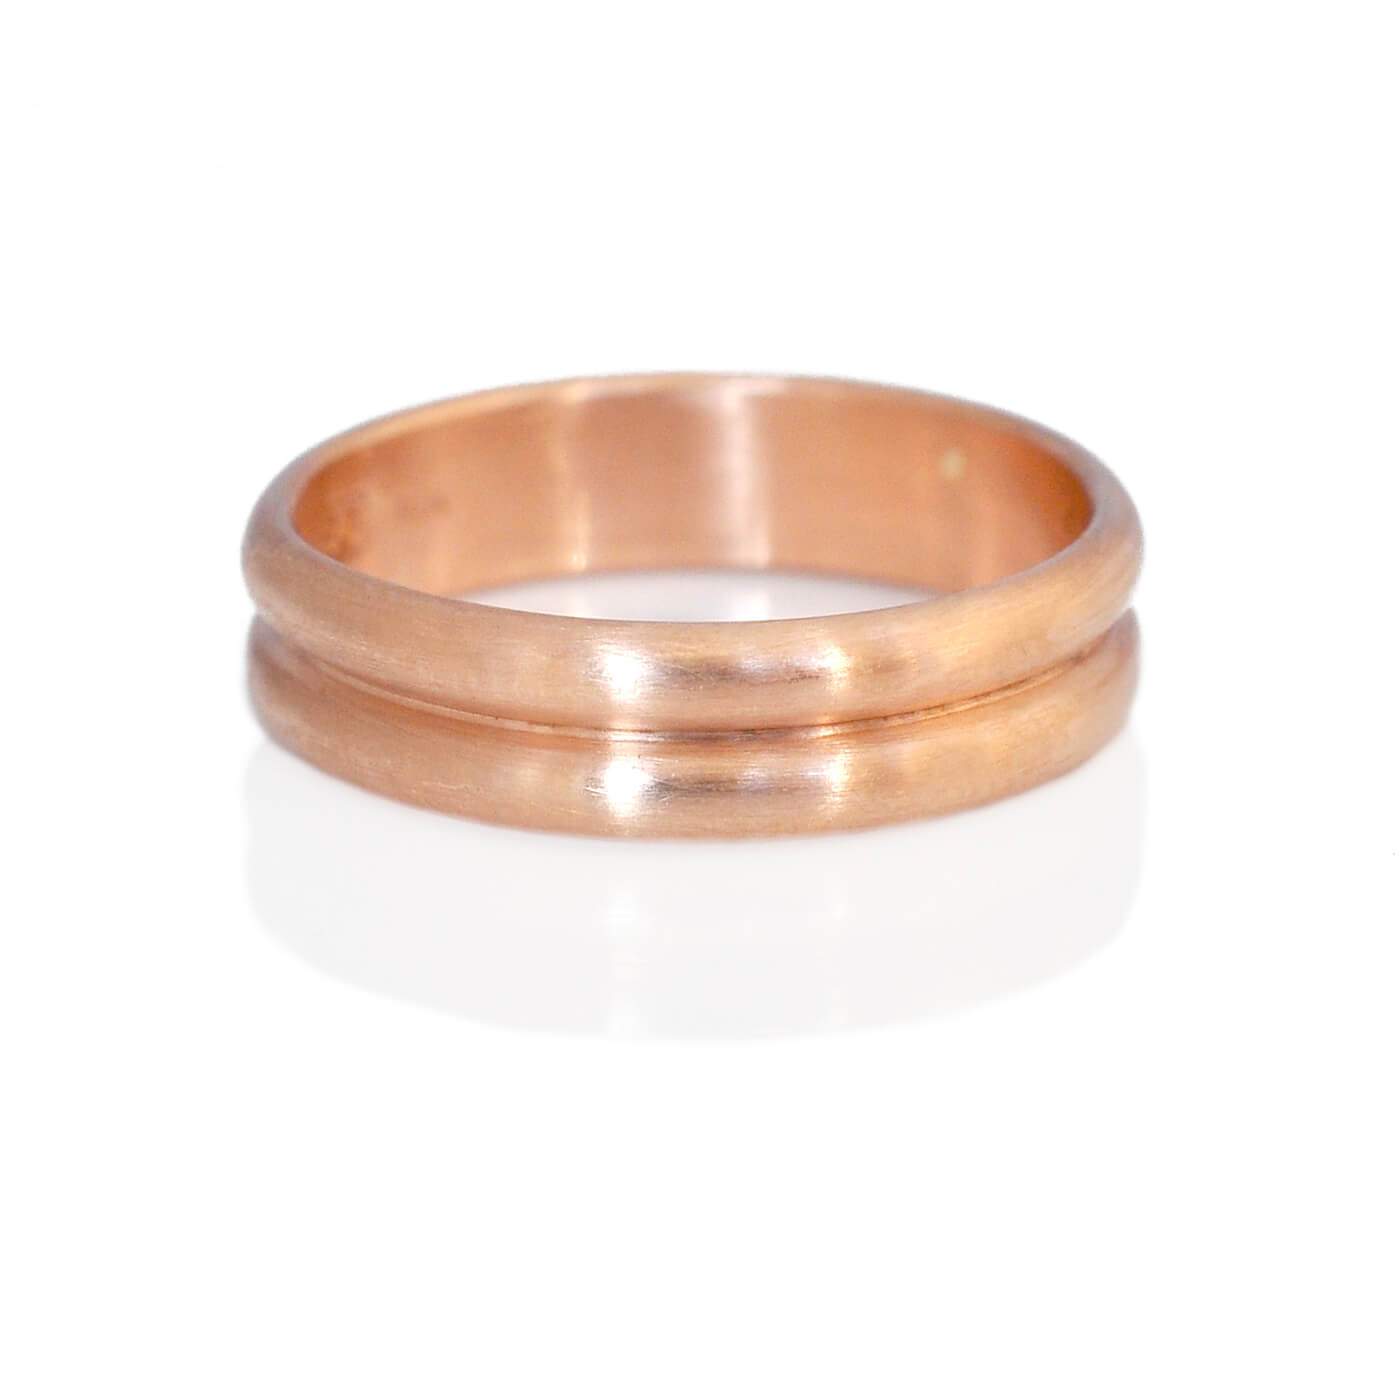 Double low dome wedding band in 14k red gold. Handmade by EC Design Jewelry in Minneapolis, MN using recycled metal.